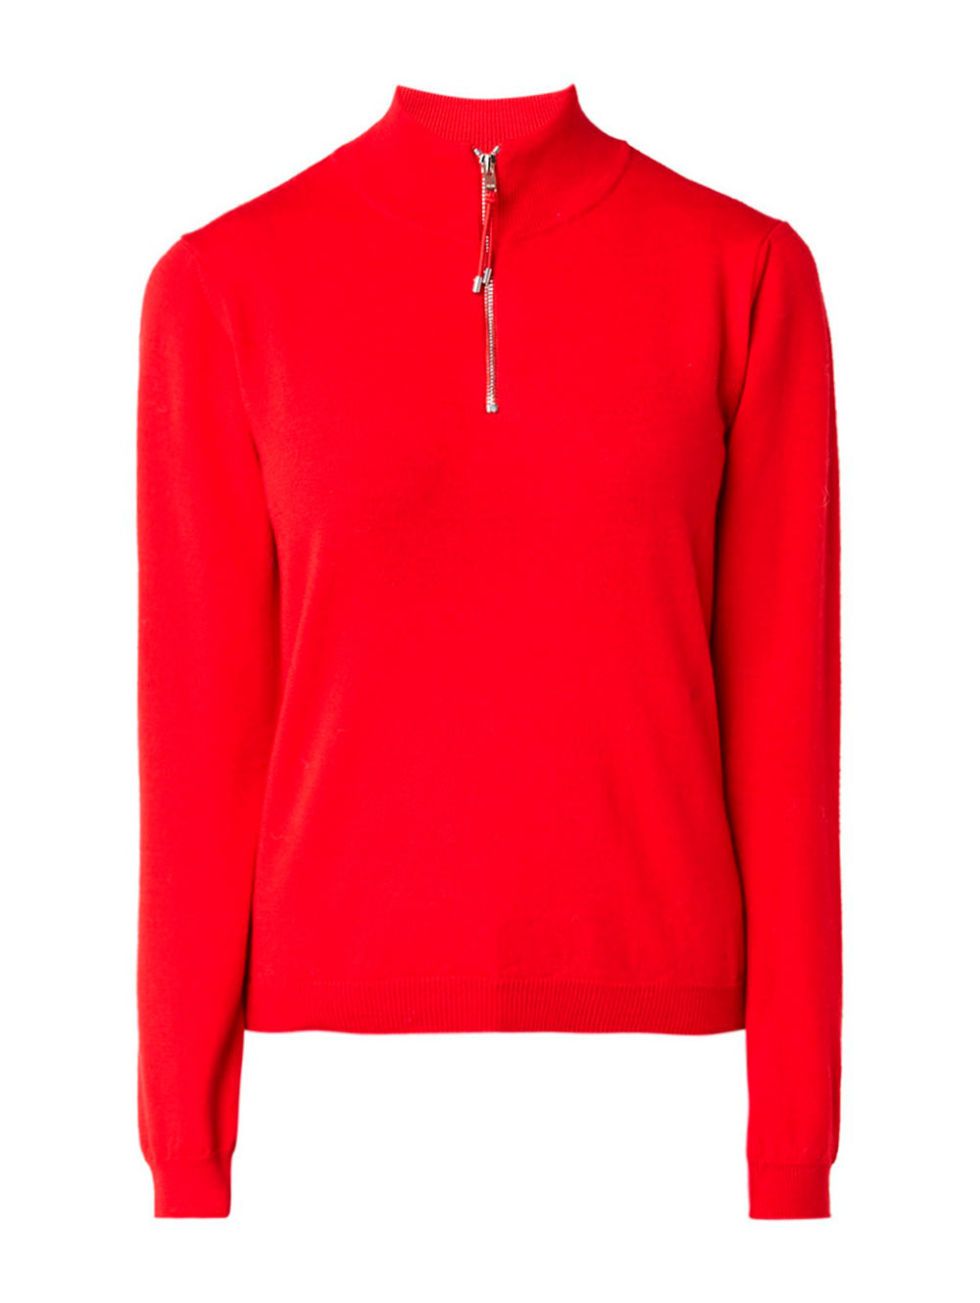 Clothing, Sleeve, Red, Outerwear, Neck, Sweater, Collar, Top, T-shirt, Jersey, 